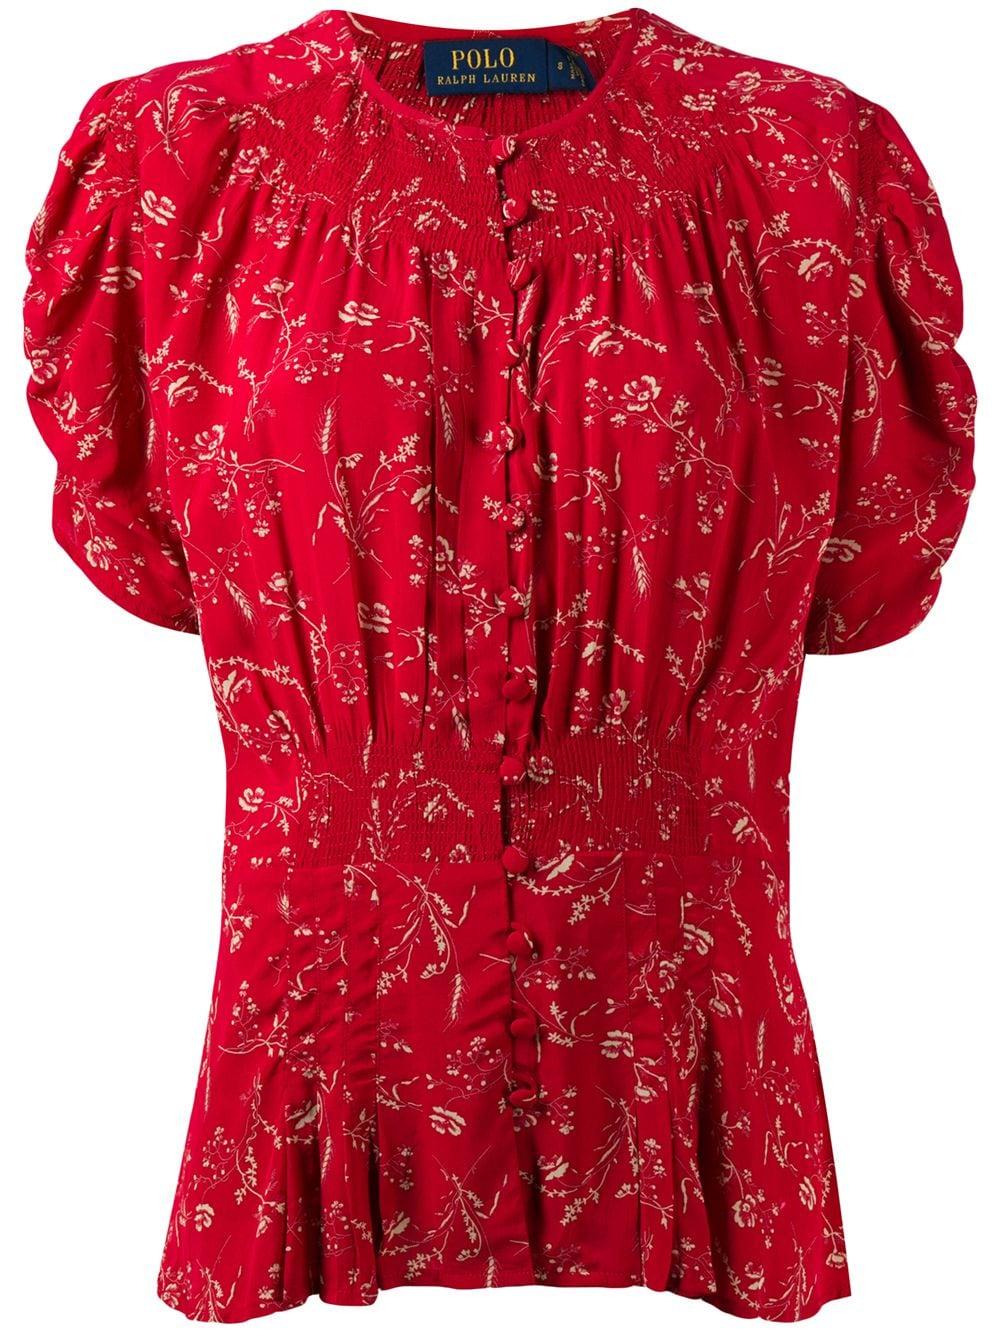 Polo Ralph Lauren Floral Print Peplum Blouse in Red | Lyst